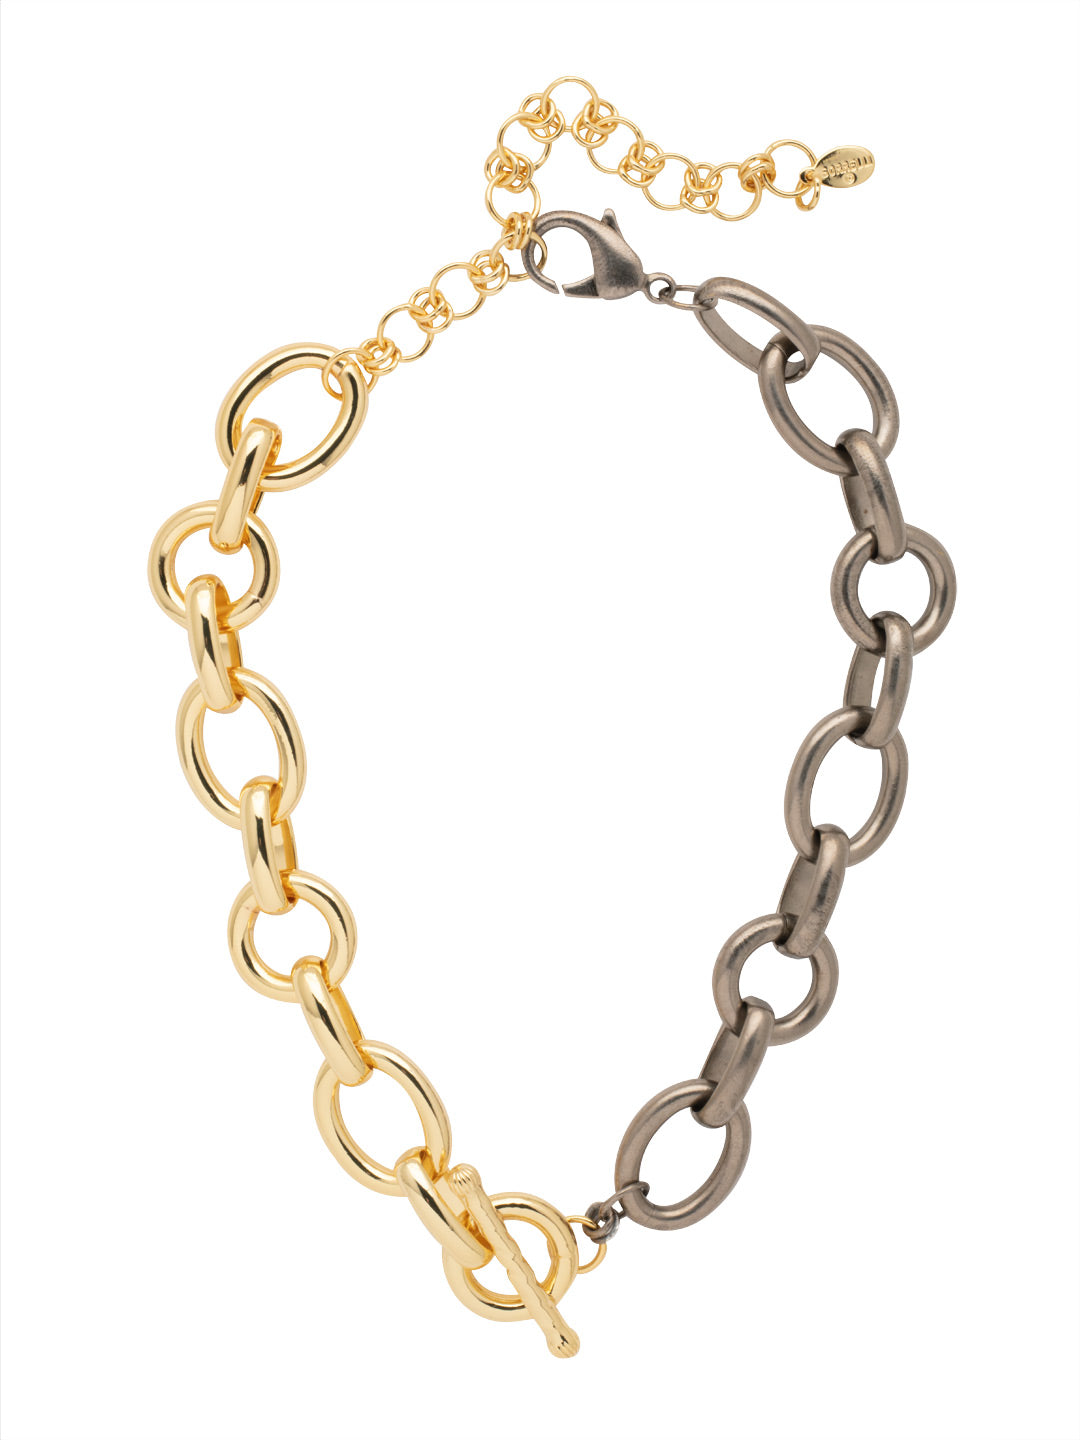 Gold Chunky Chain Necklace Statement Necklace Chain Link 